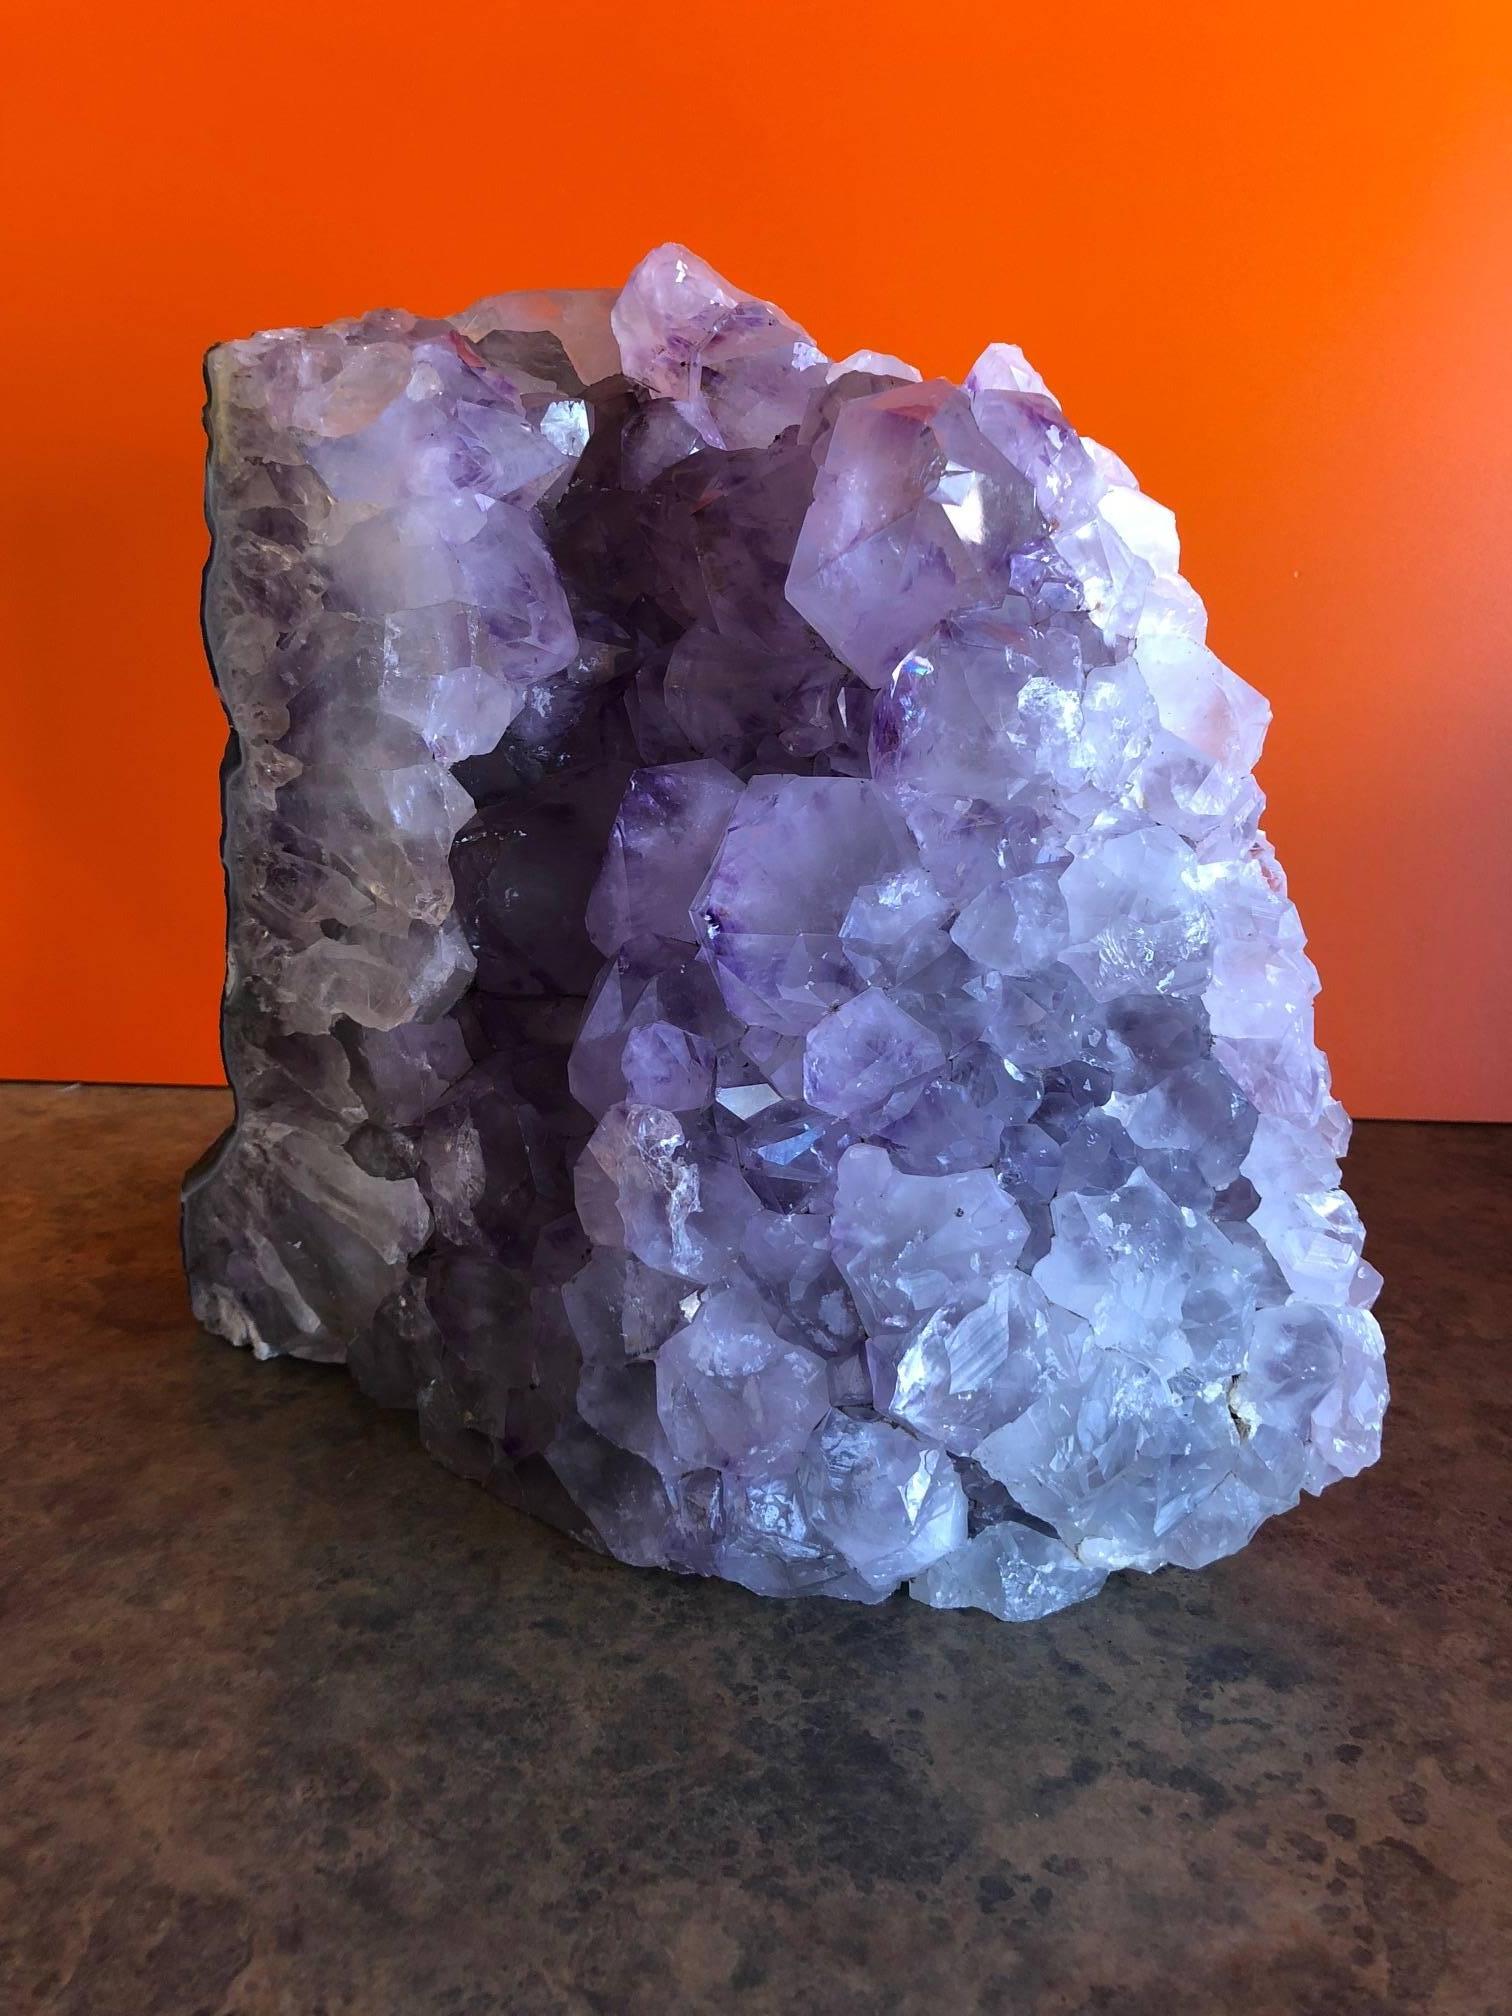 Weighing in at almost 20 pounds, this stunning natural amethyst crystal cluster / agate geode is believed to be from Brazil and would make a great decorative piece or addition to any mineral collection!

The piece is all natural and displays very